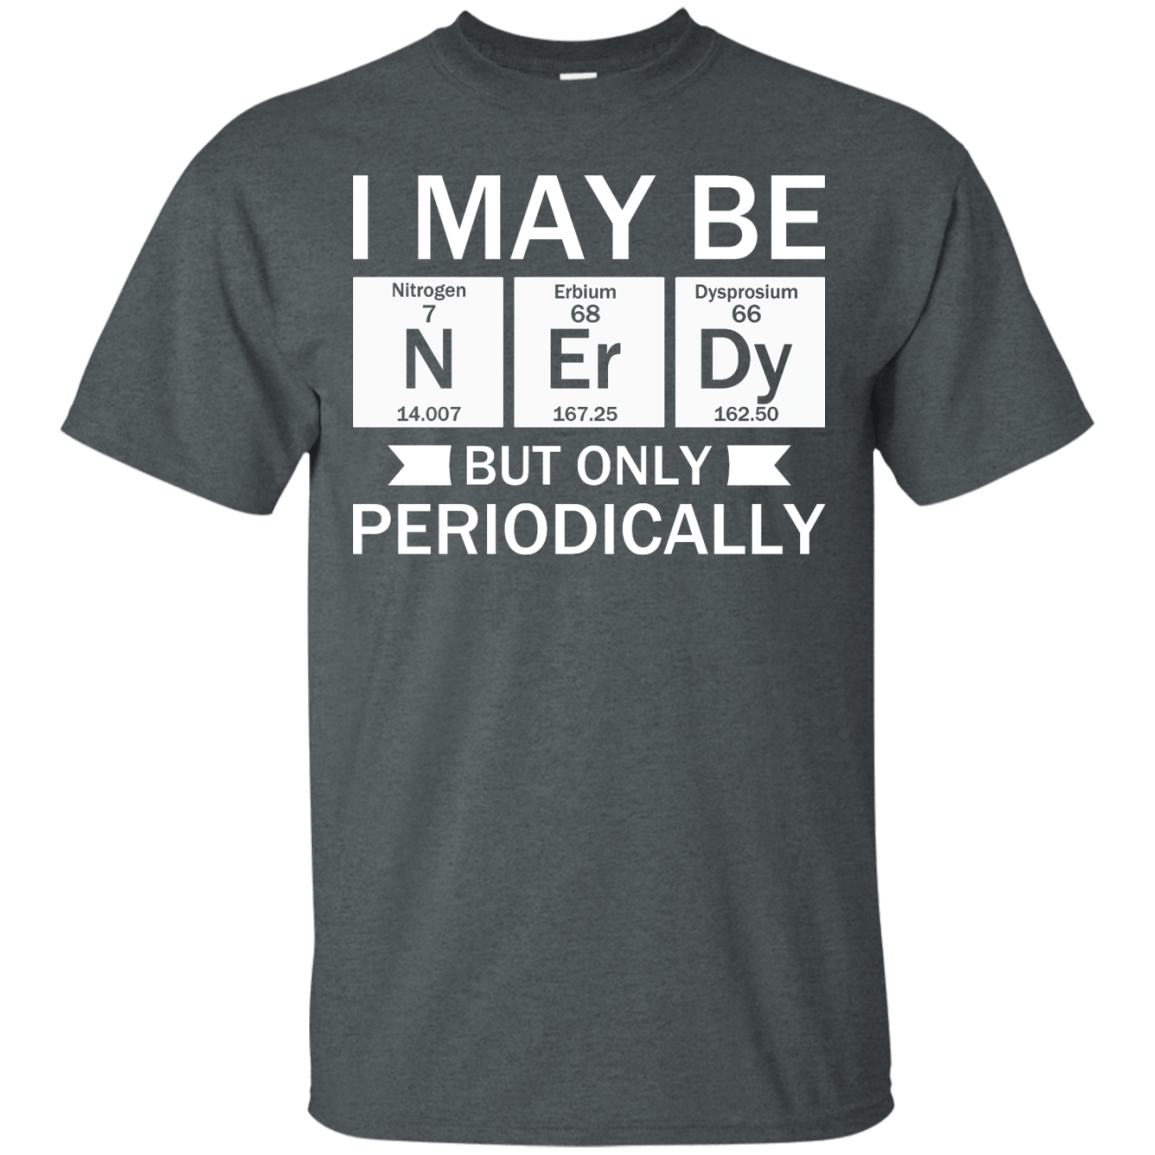 I May Be Nerdy But Only Periodically | Funny T-shirts | Engineering ...